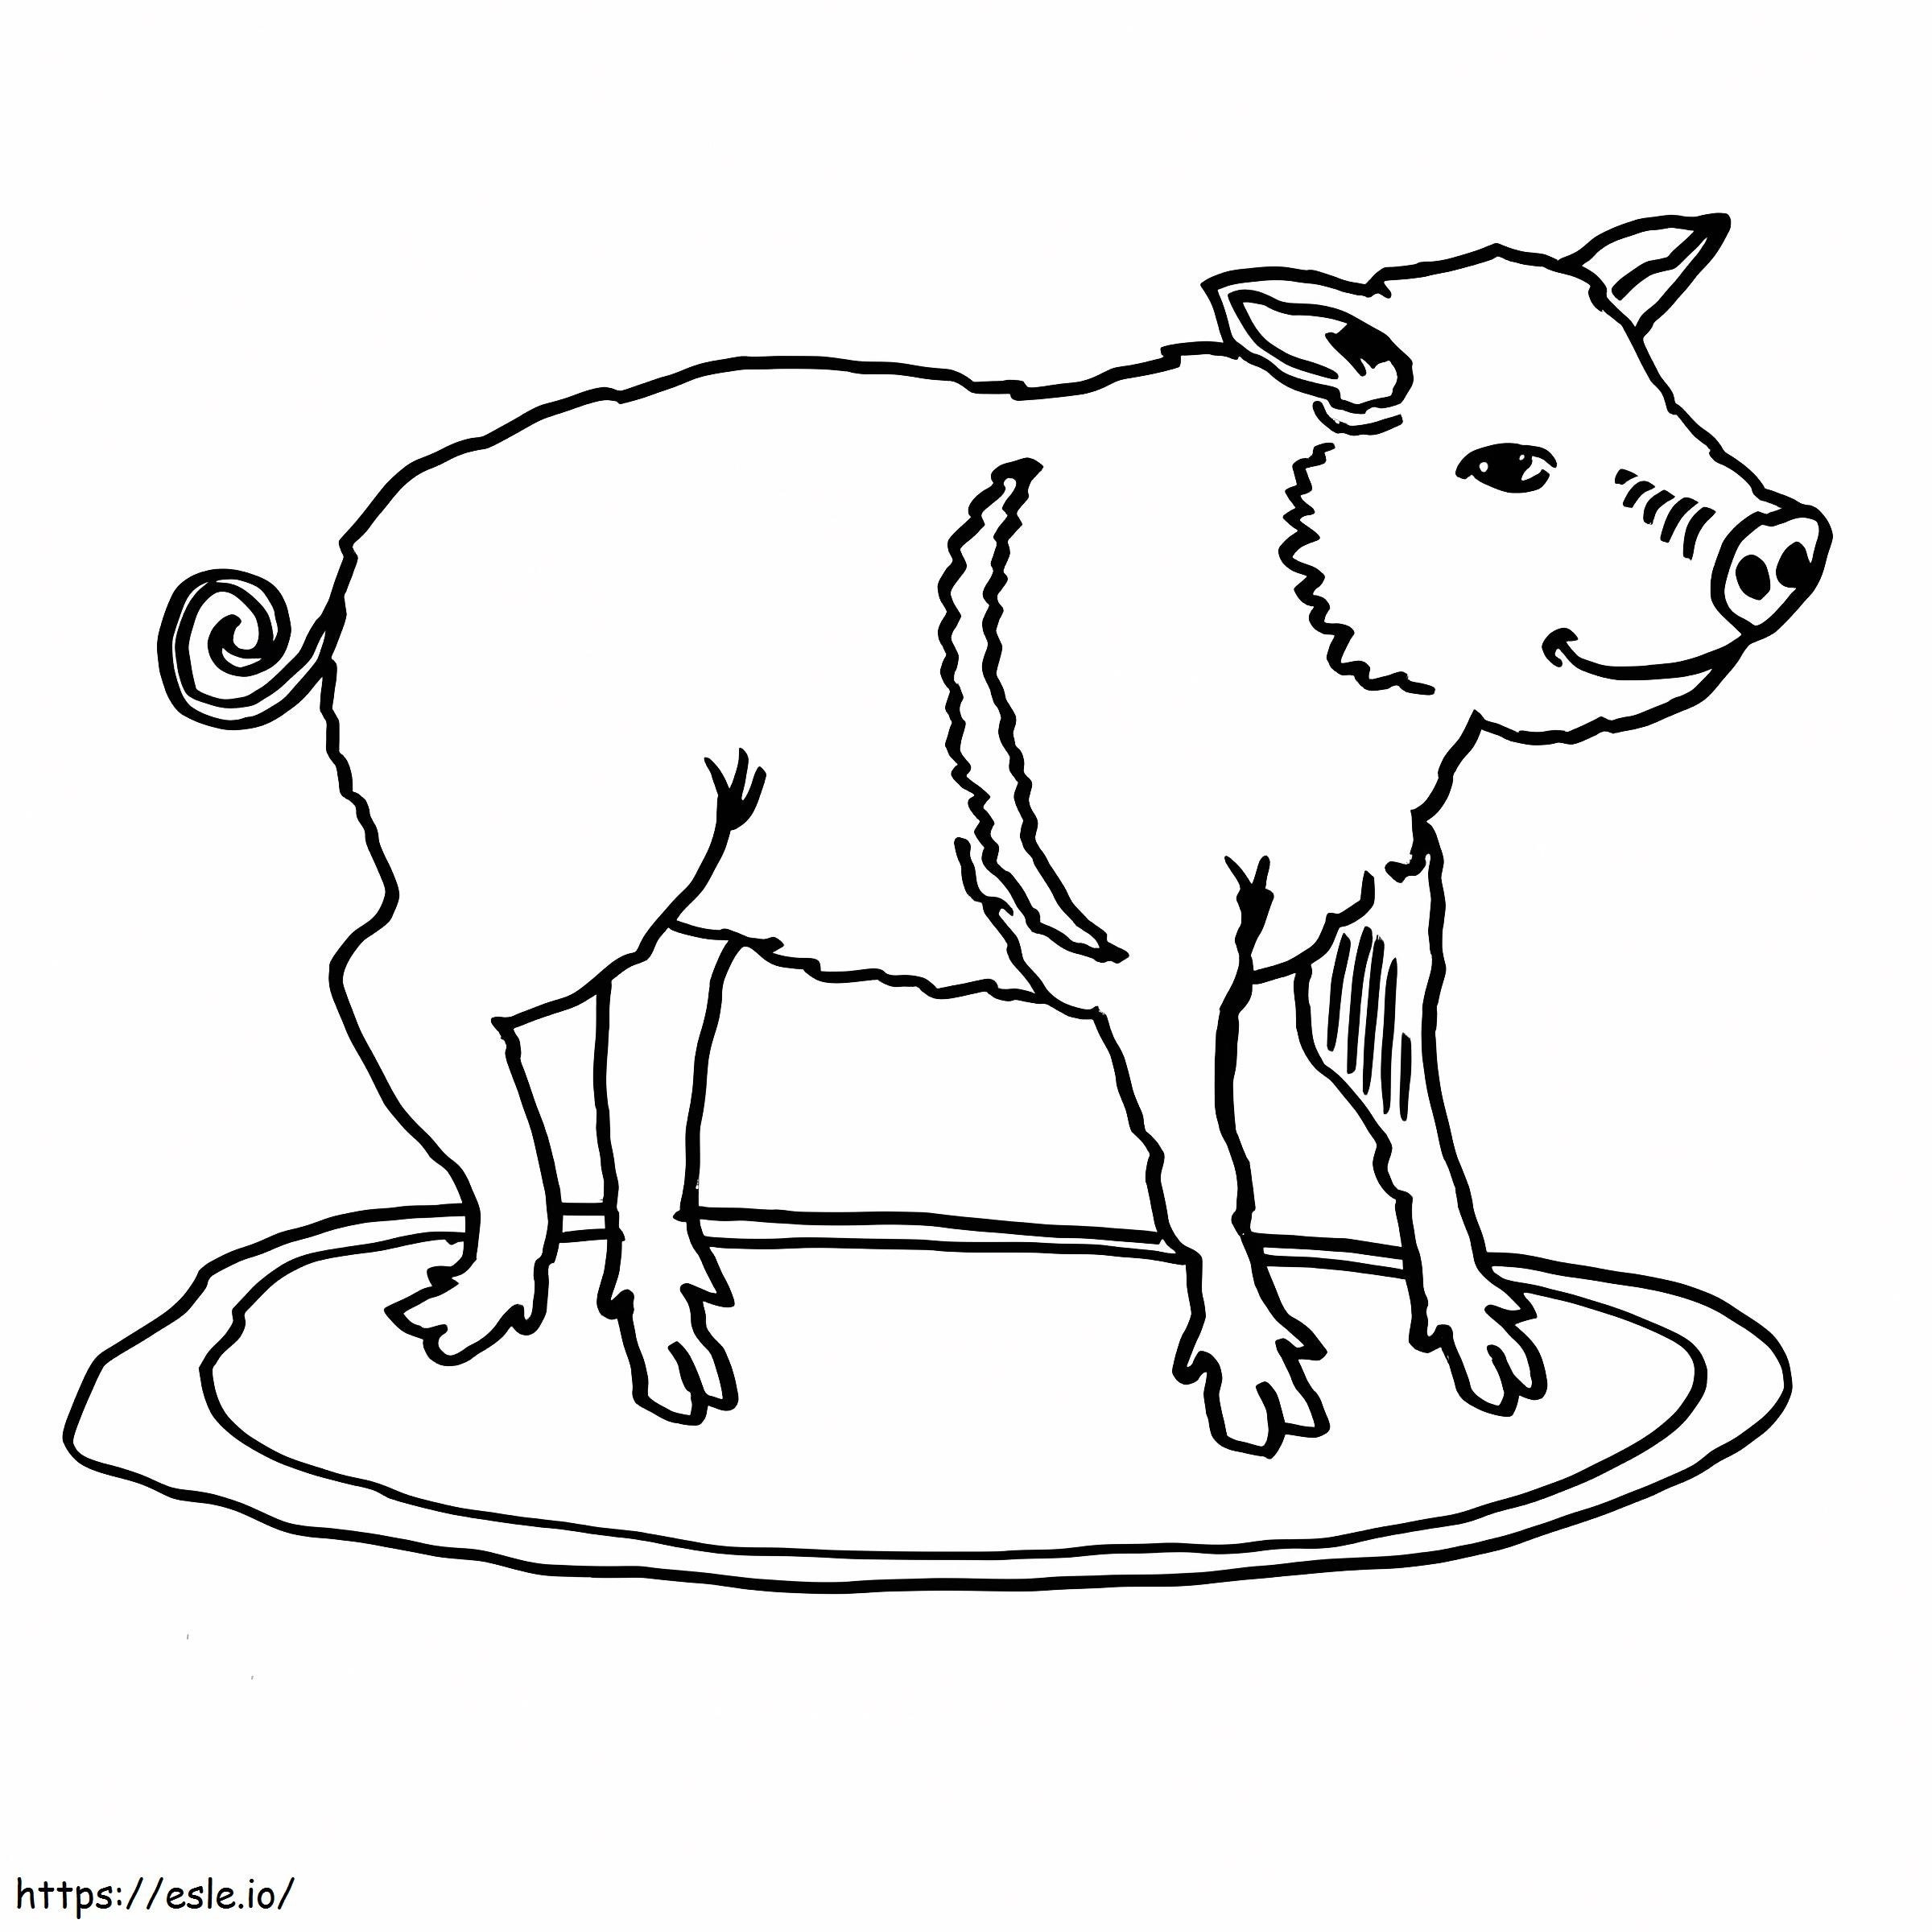 Little Hungry Pig coloring page